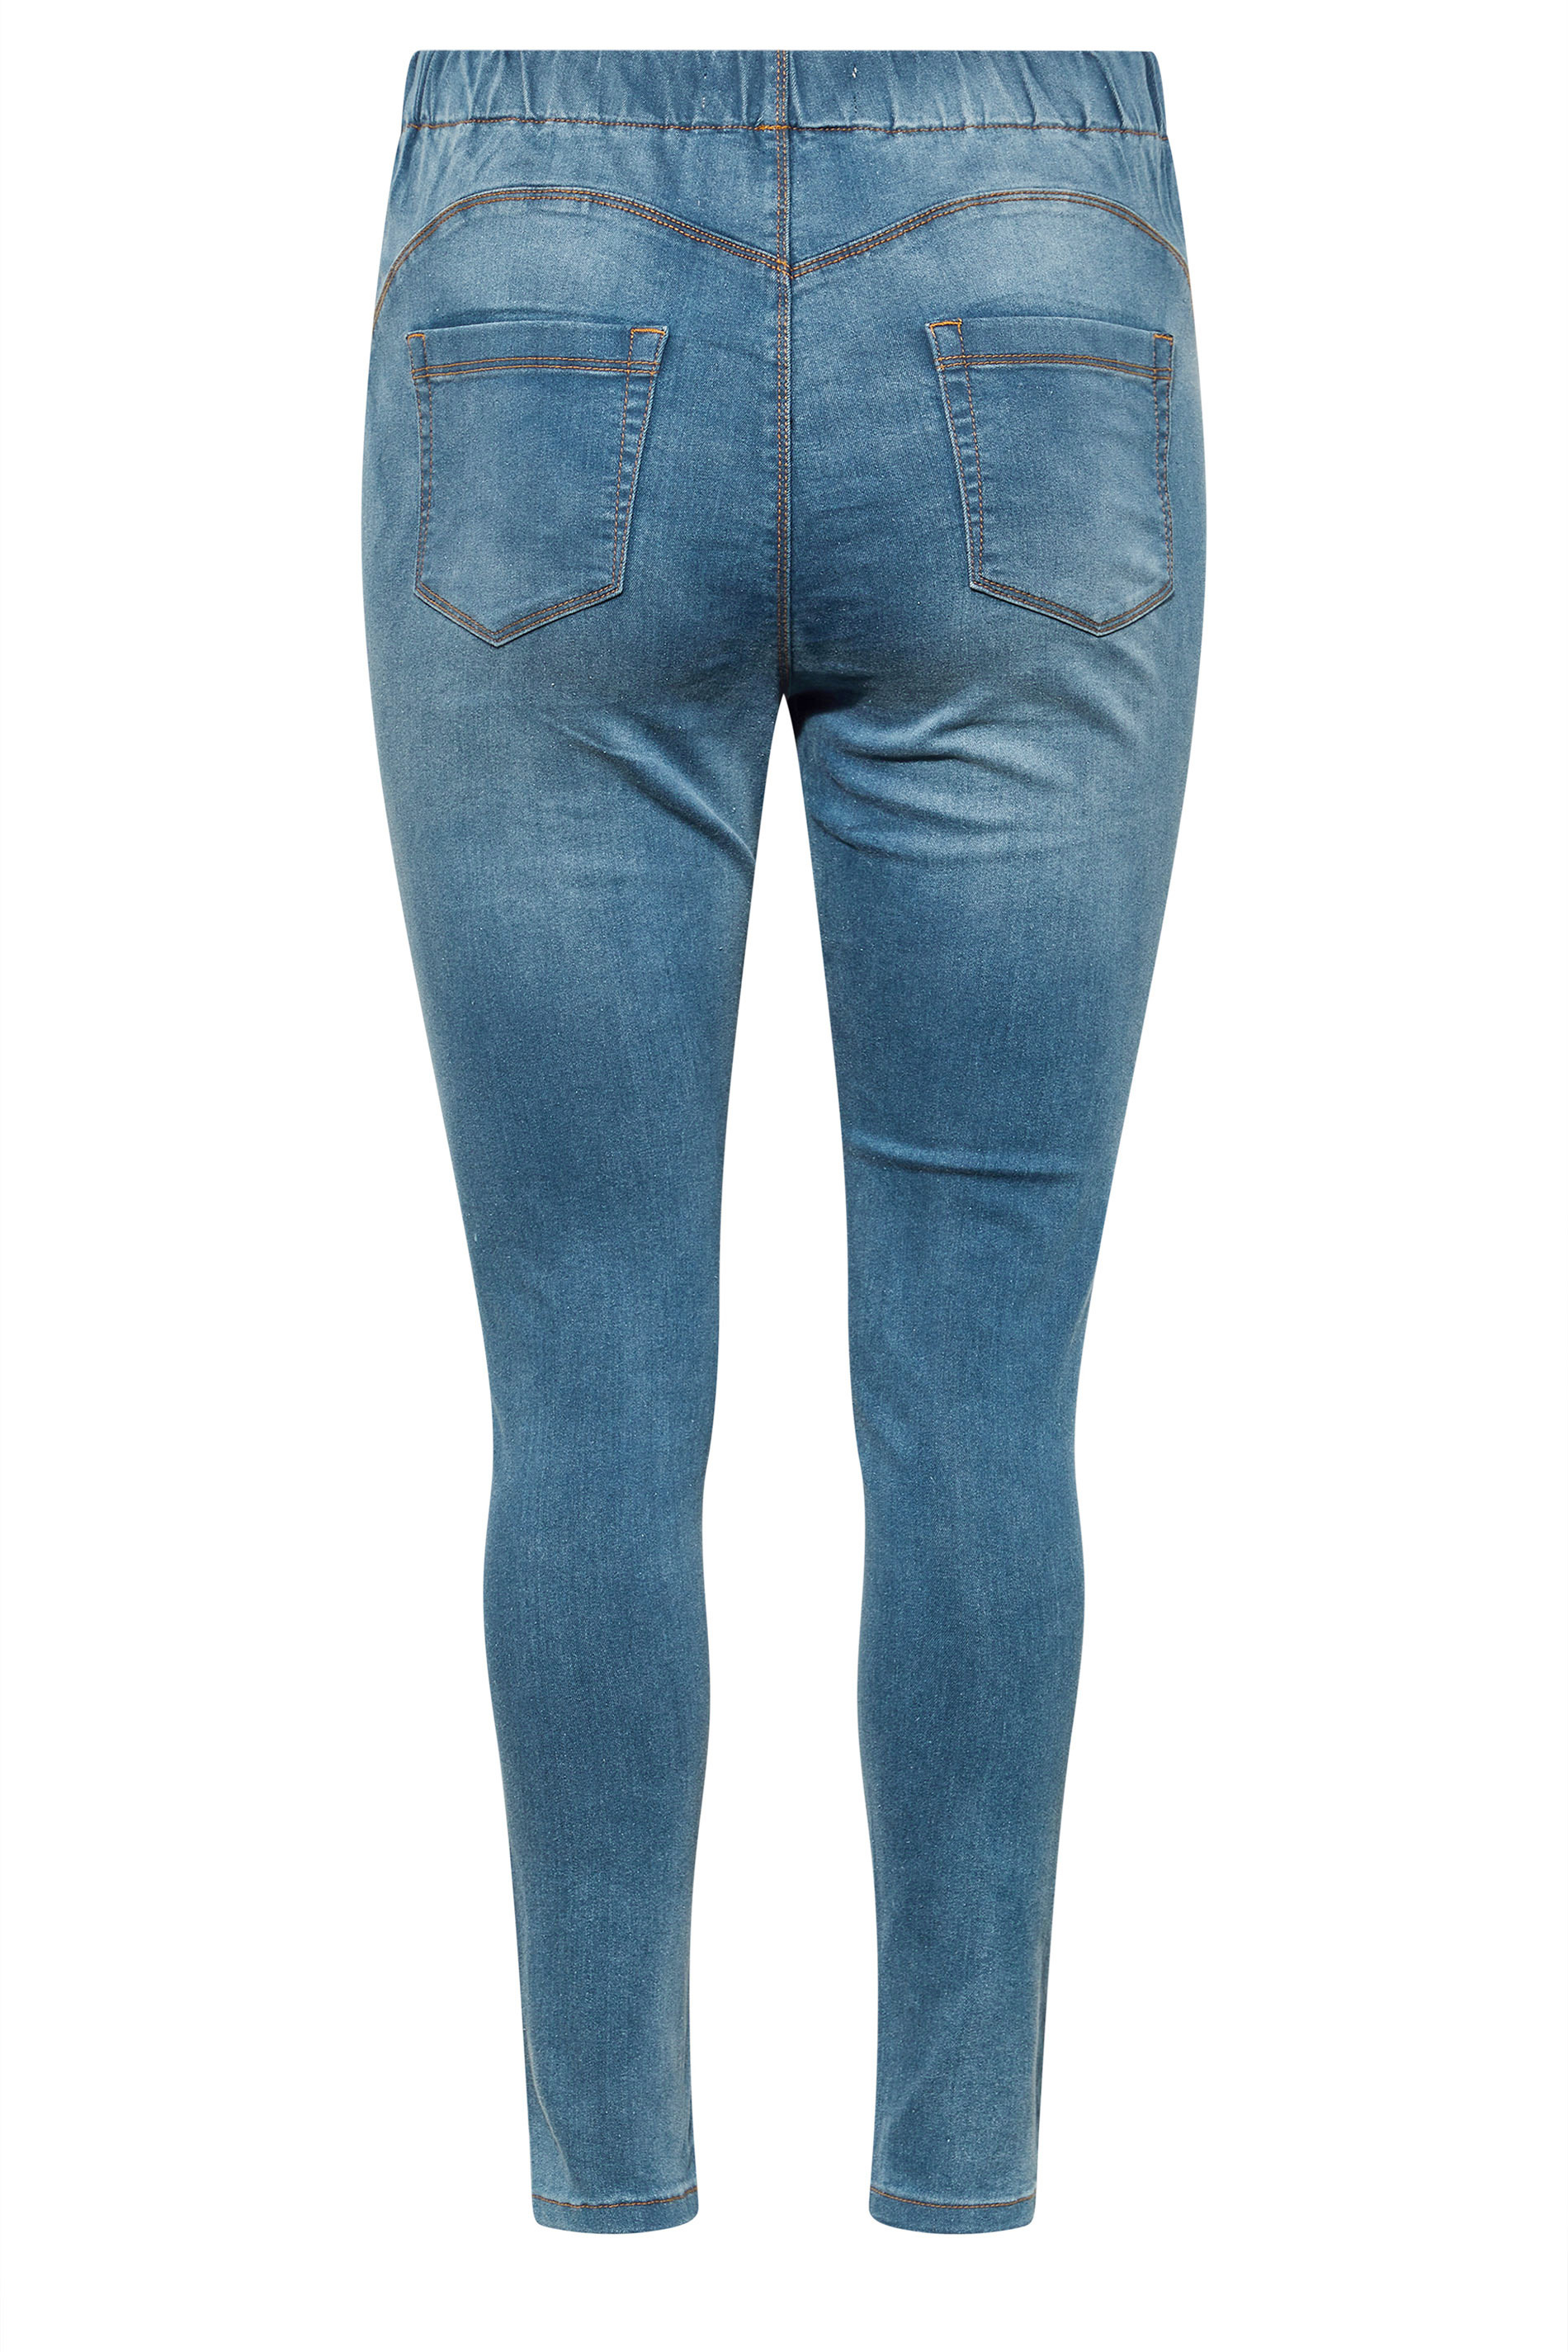 Know That You're Home Jeggings, Medium Wash – Chic Soul